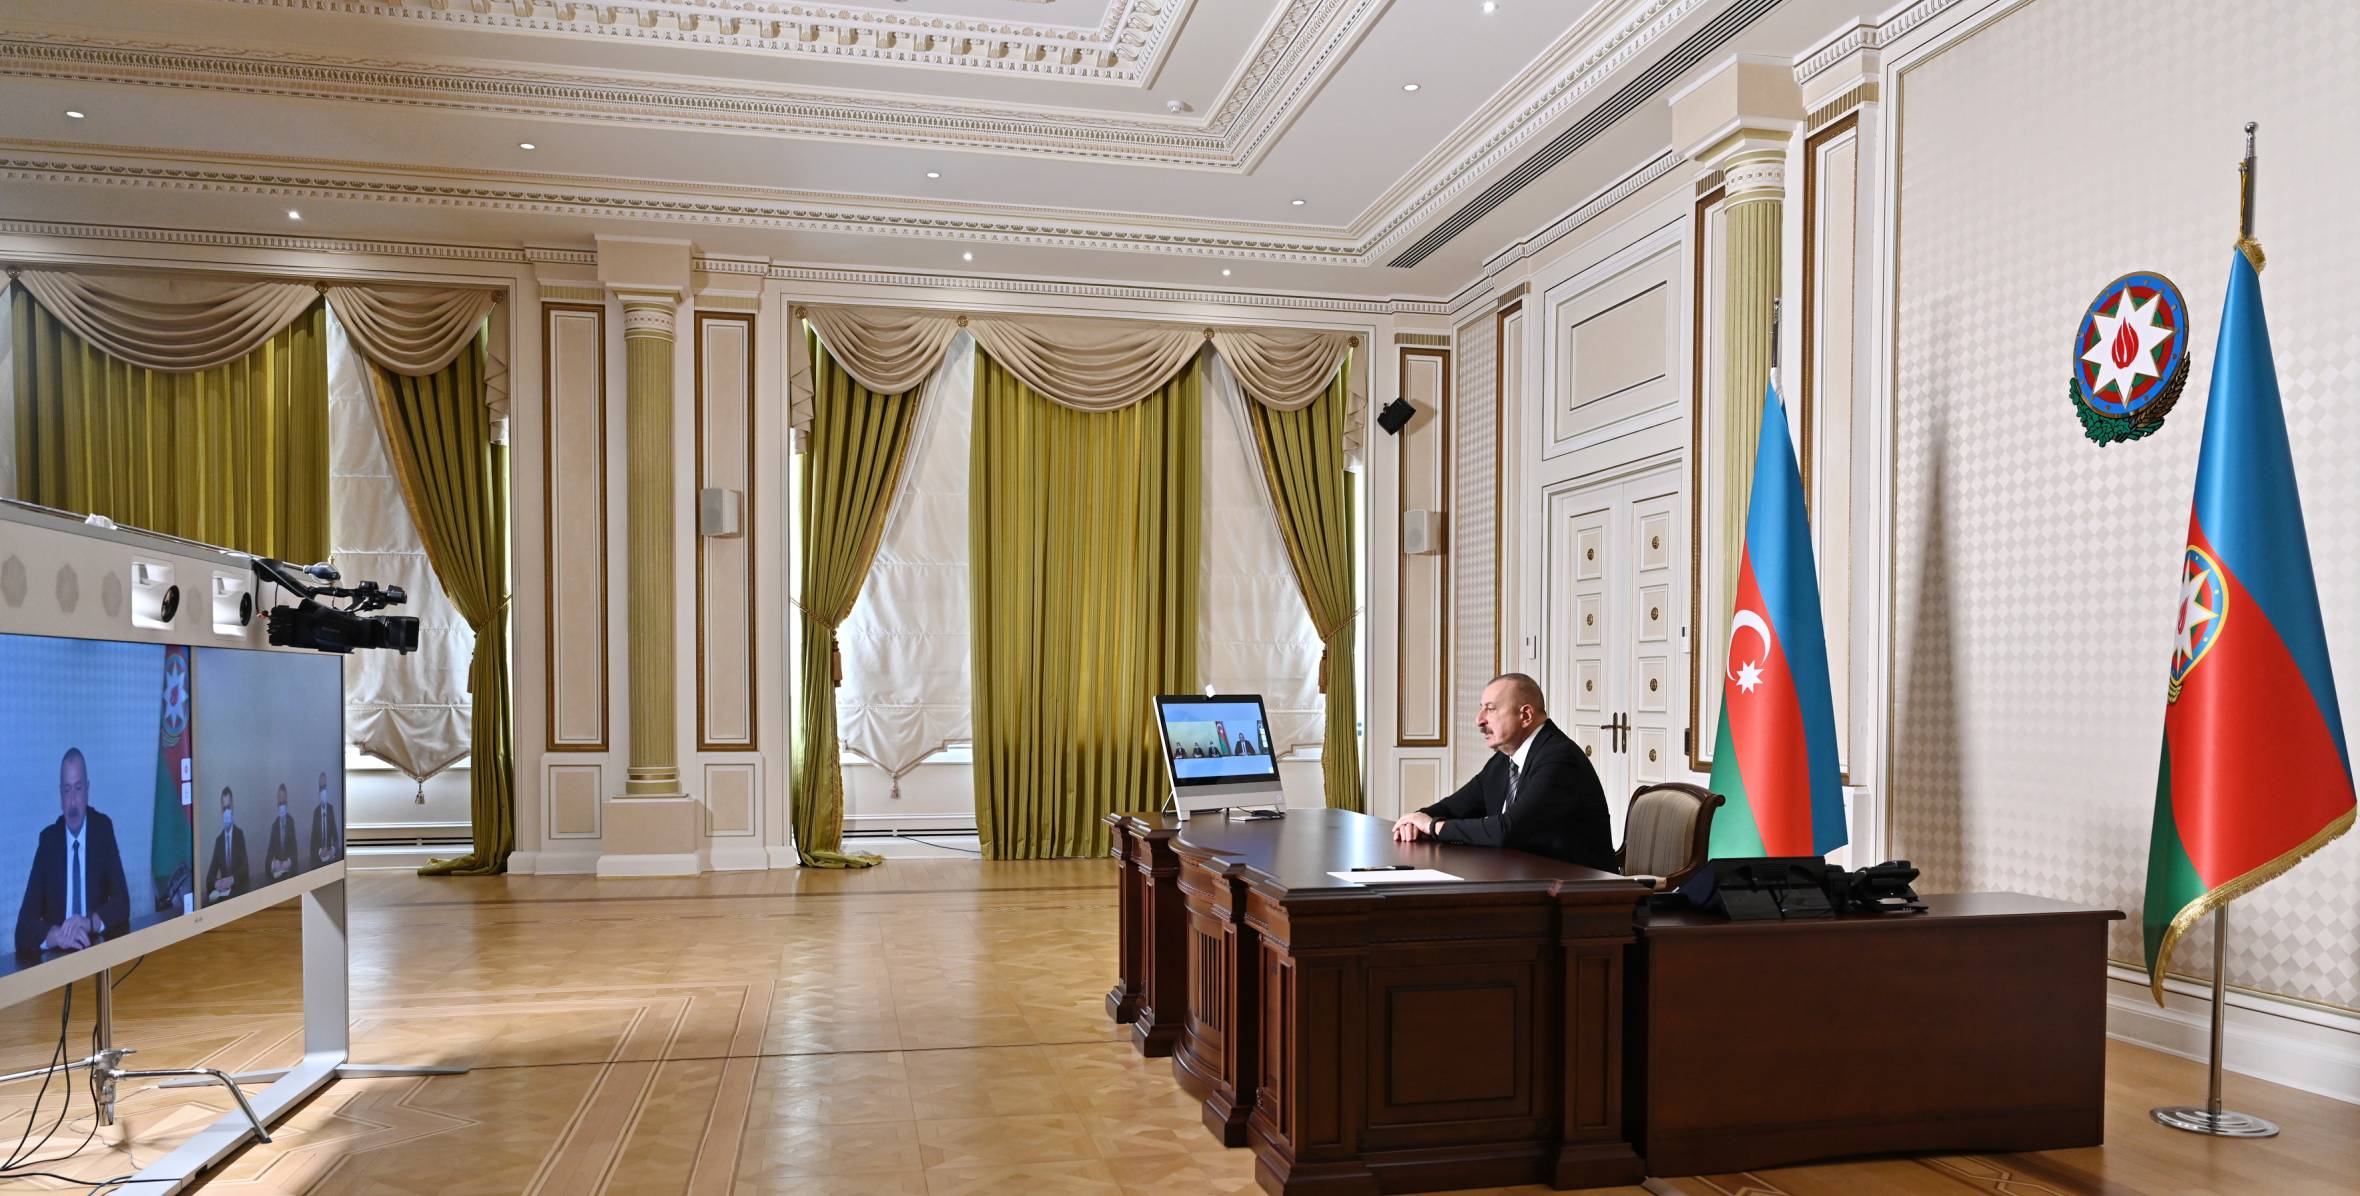 Ilham Aliyev received in a video format Joshgun Jabrayilov due to his appointment as head of Nizami District Executive Authority, Elgin Habibullayev due to his appointment as head of Narimanov District Executive Authority, Baku, and Elkhan Ibrahimov due to his appointment as head of Kurdamir District Executive Authority